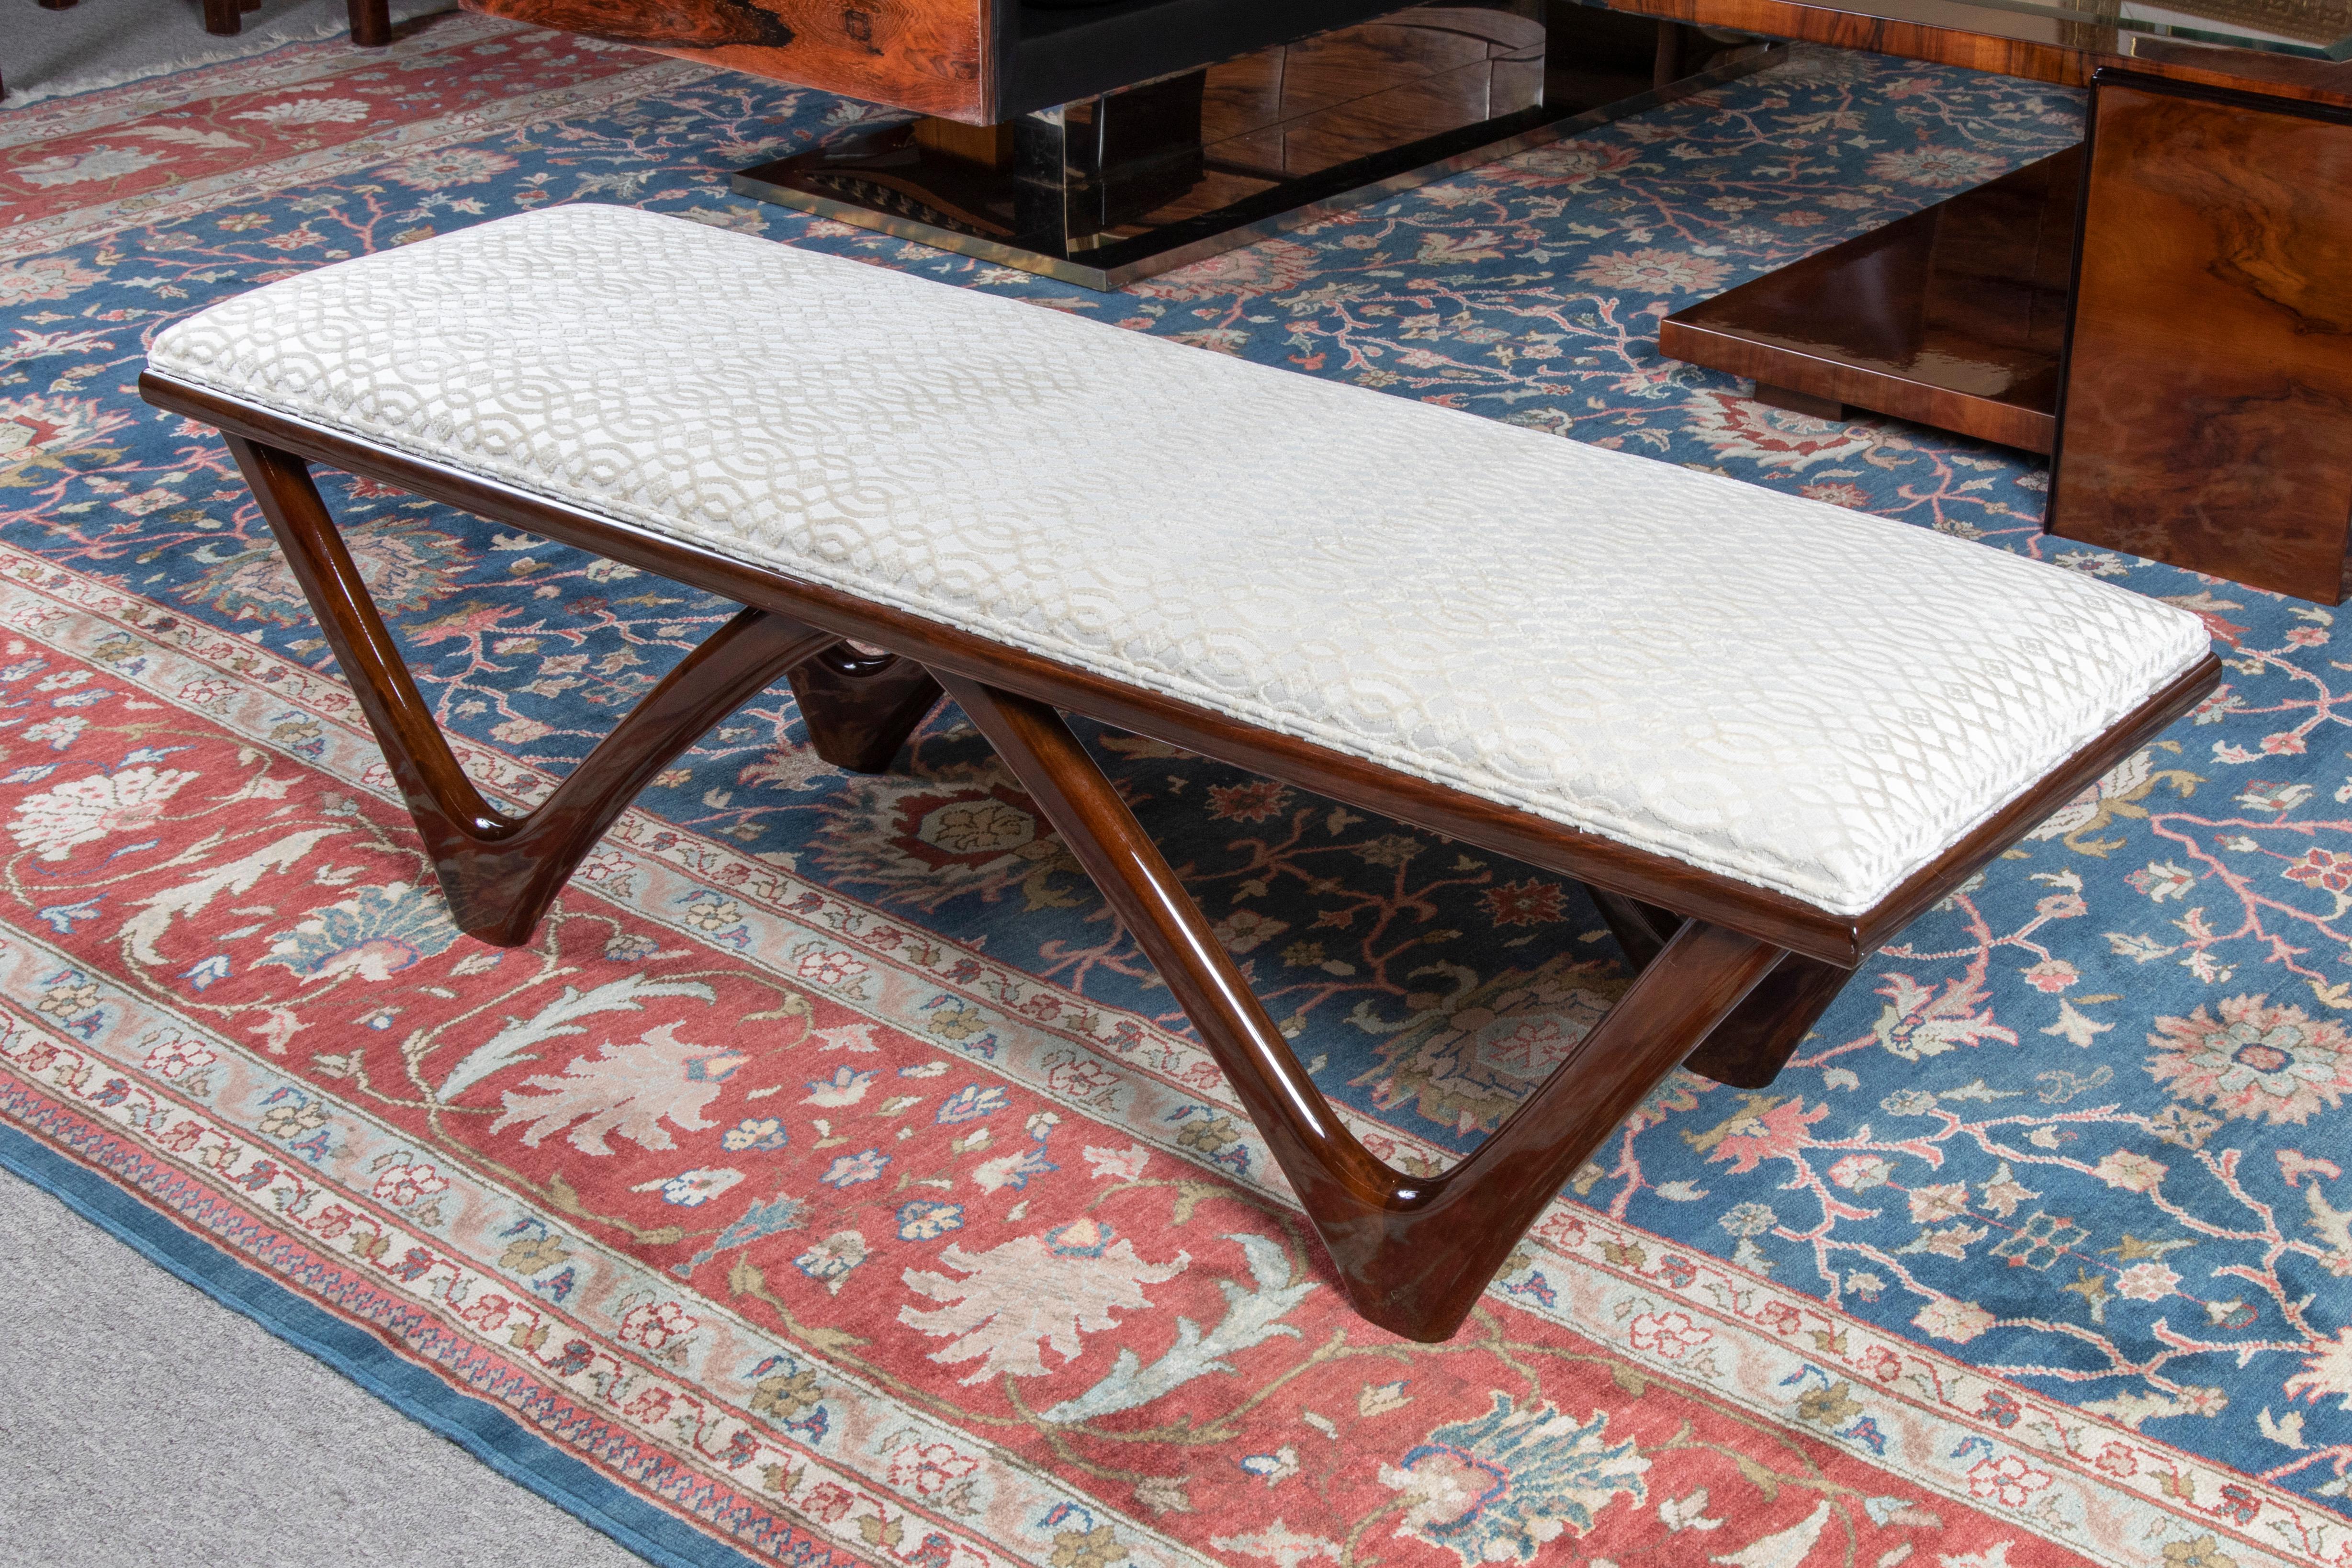 Art Deco French bench

Bench has wide rectangular seat, re-upholstered with light beige fabric. 
Bench is made out of fine Macassar wood.
Has 4 angular pointy wood legs,

French, c. 1930s
Condition is perfect. Restored. 
Measures: 55” x 18”